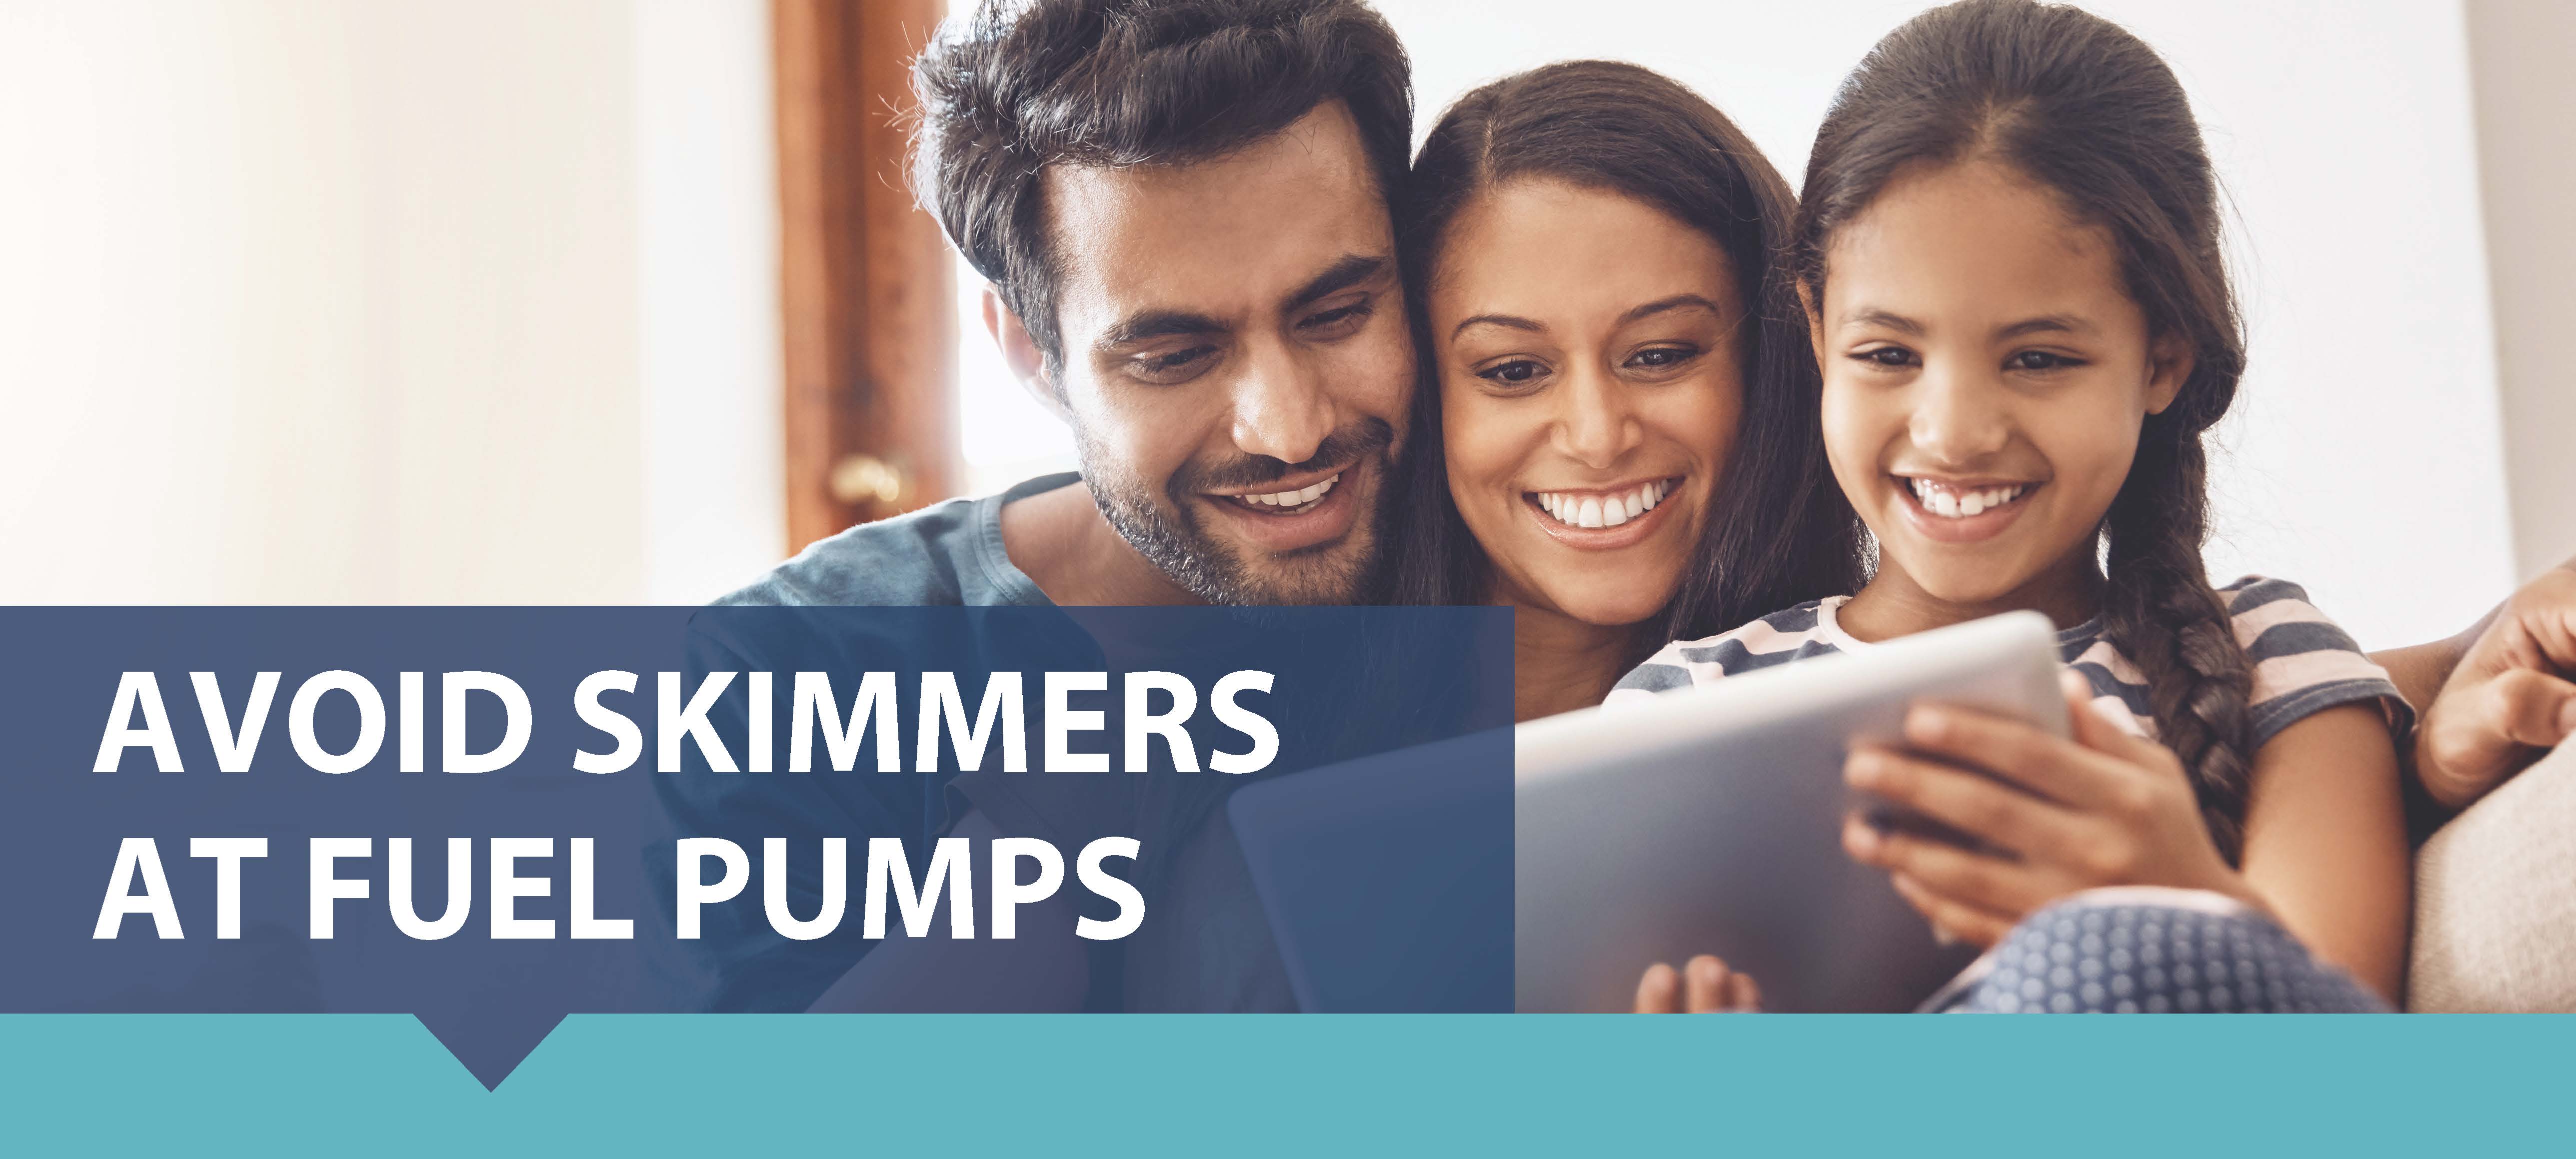 Avoid Skimmers at fuel pumps